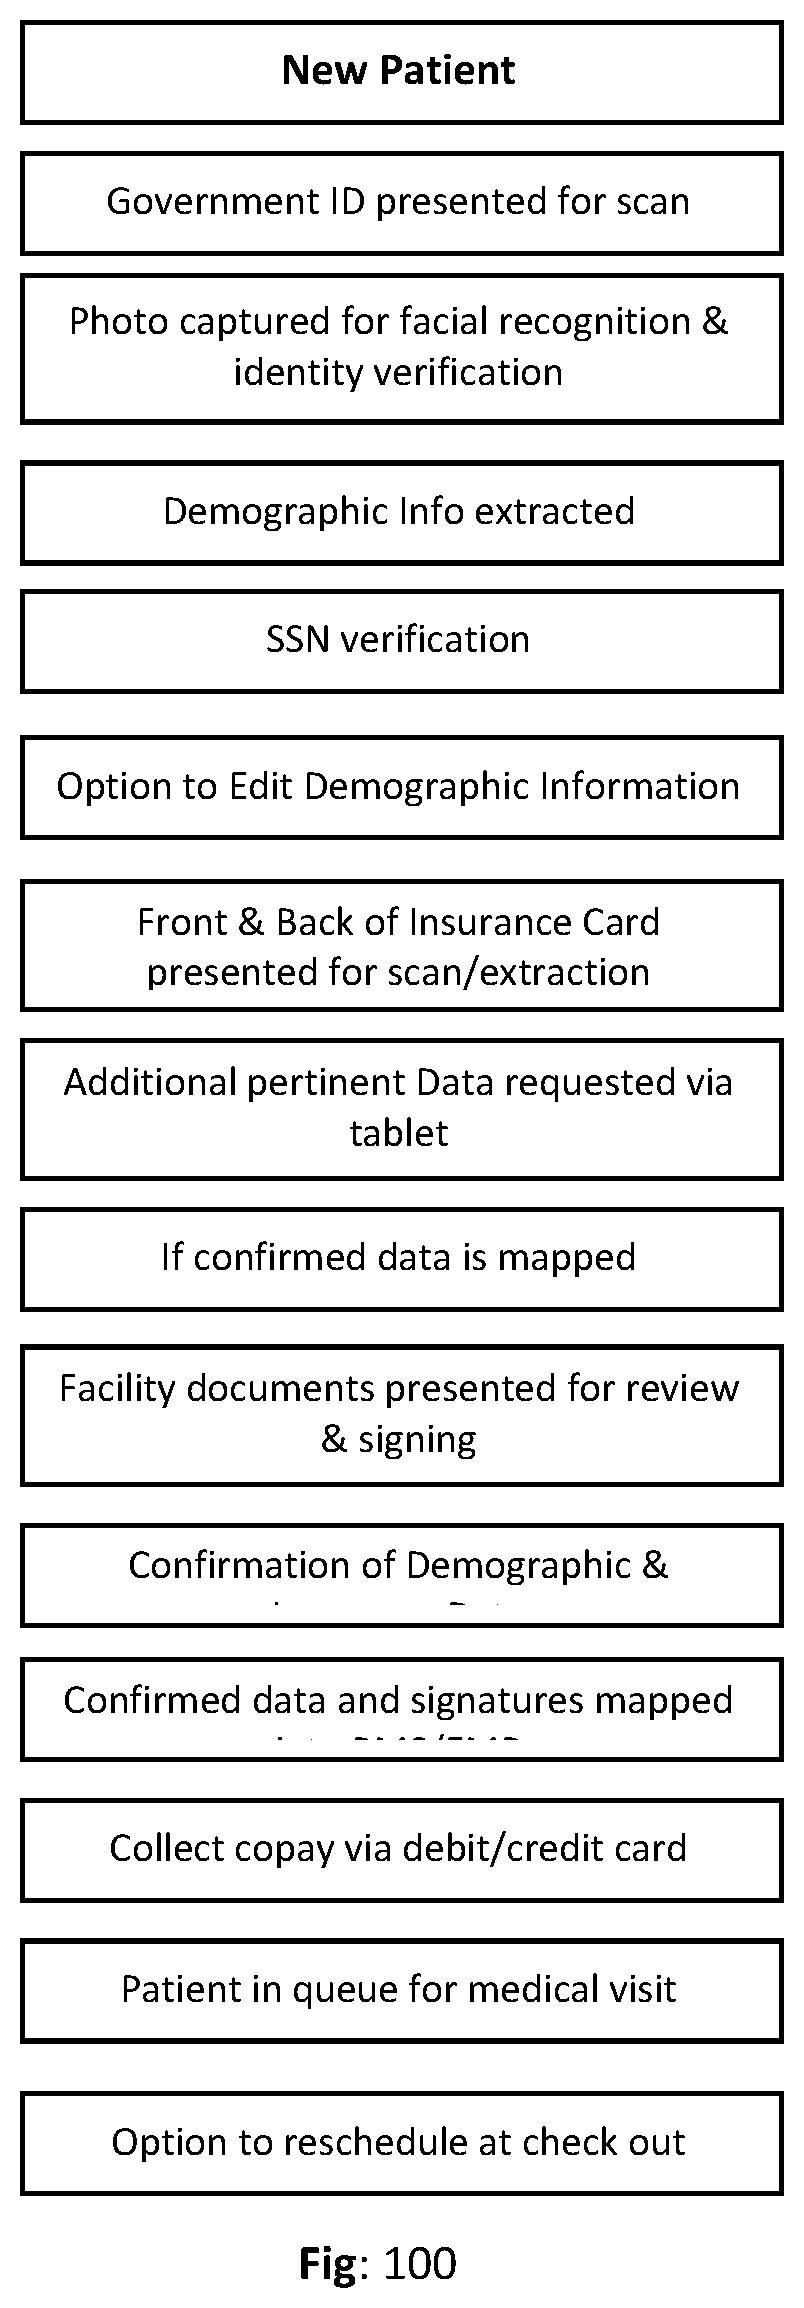 Electronic Patient Registration and Billing